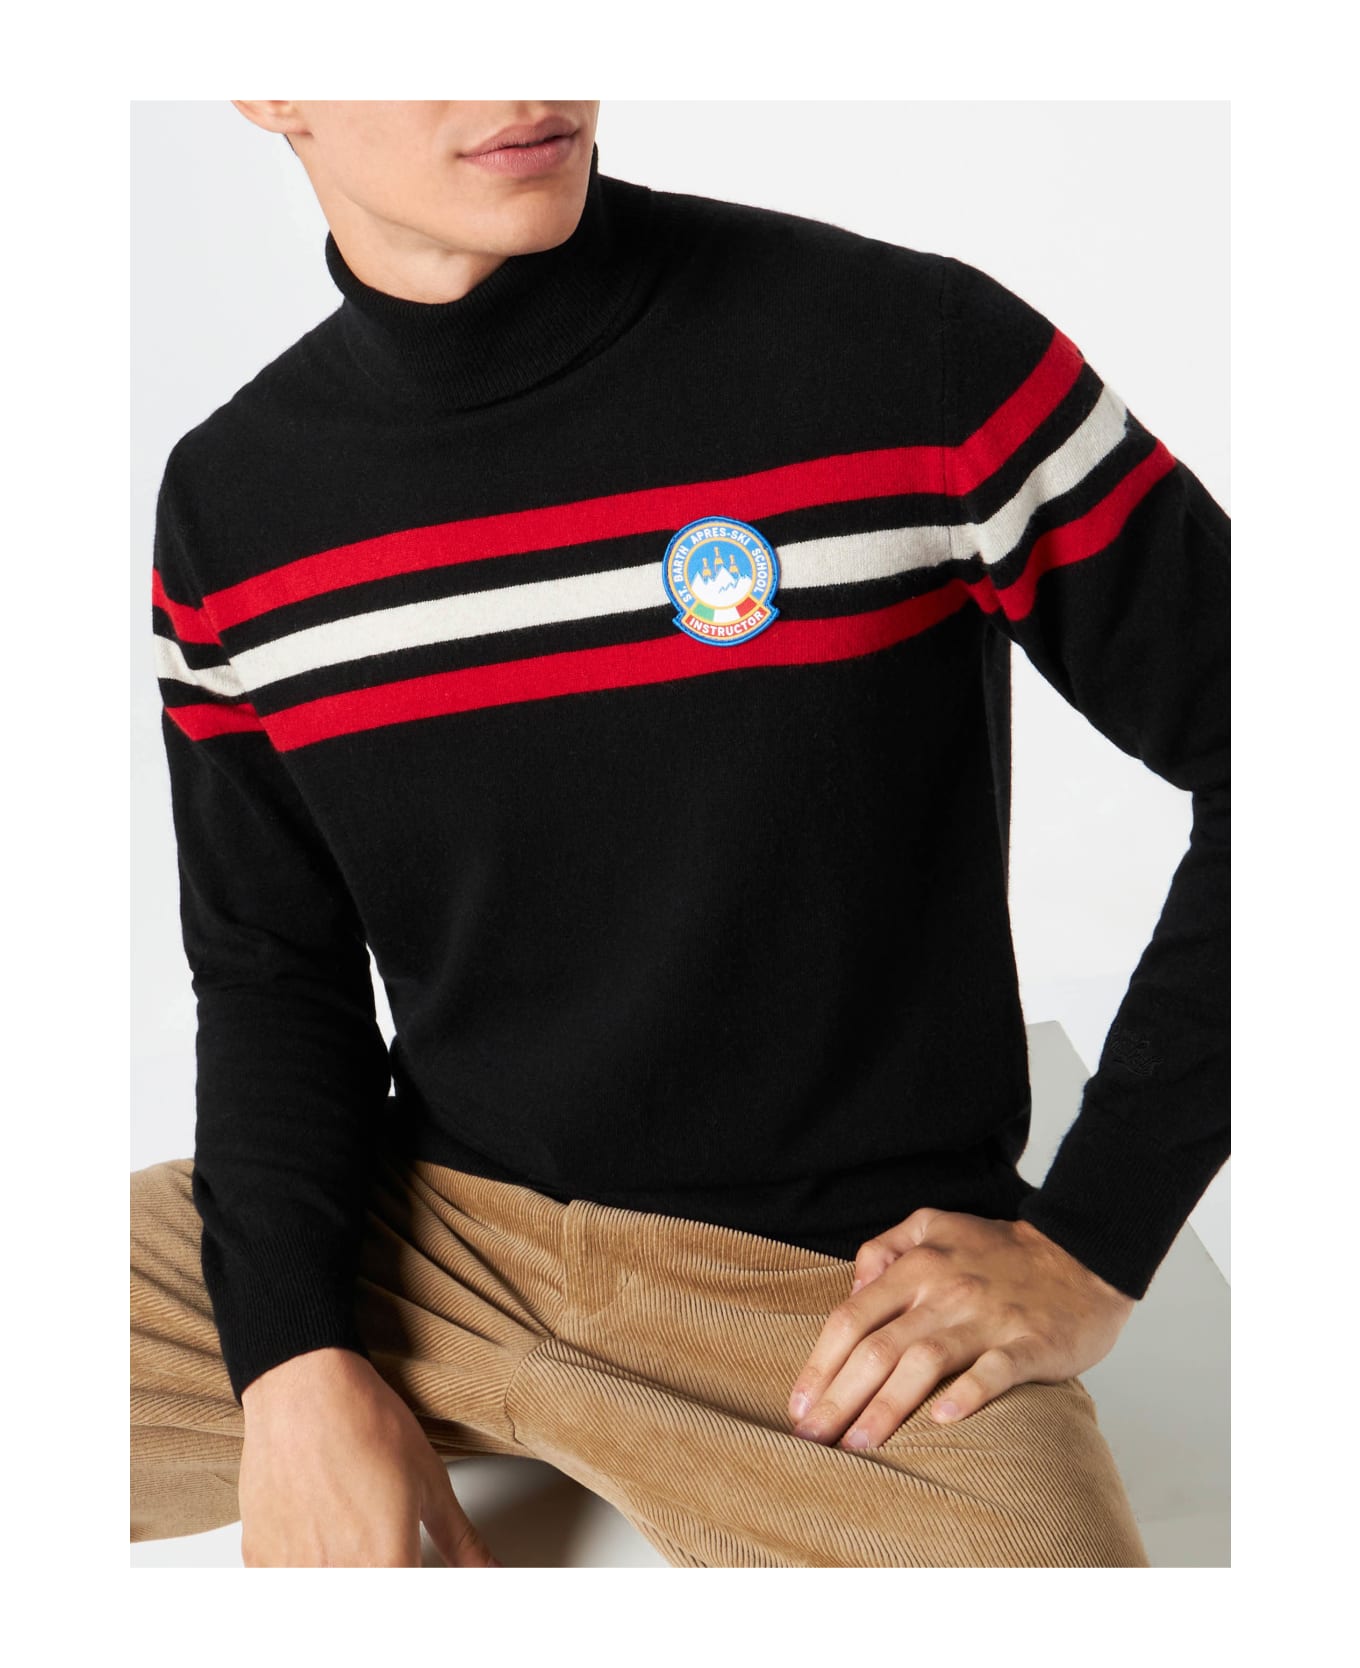 MC2 Saint Barth Blended Cashmere Turtle Neck Sweater With Patch - BLACK